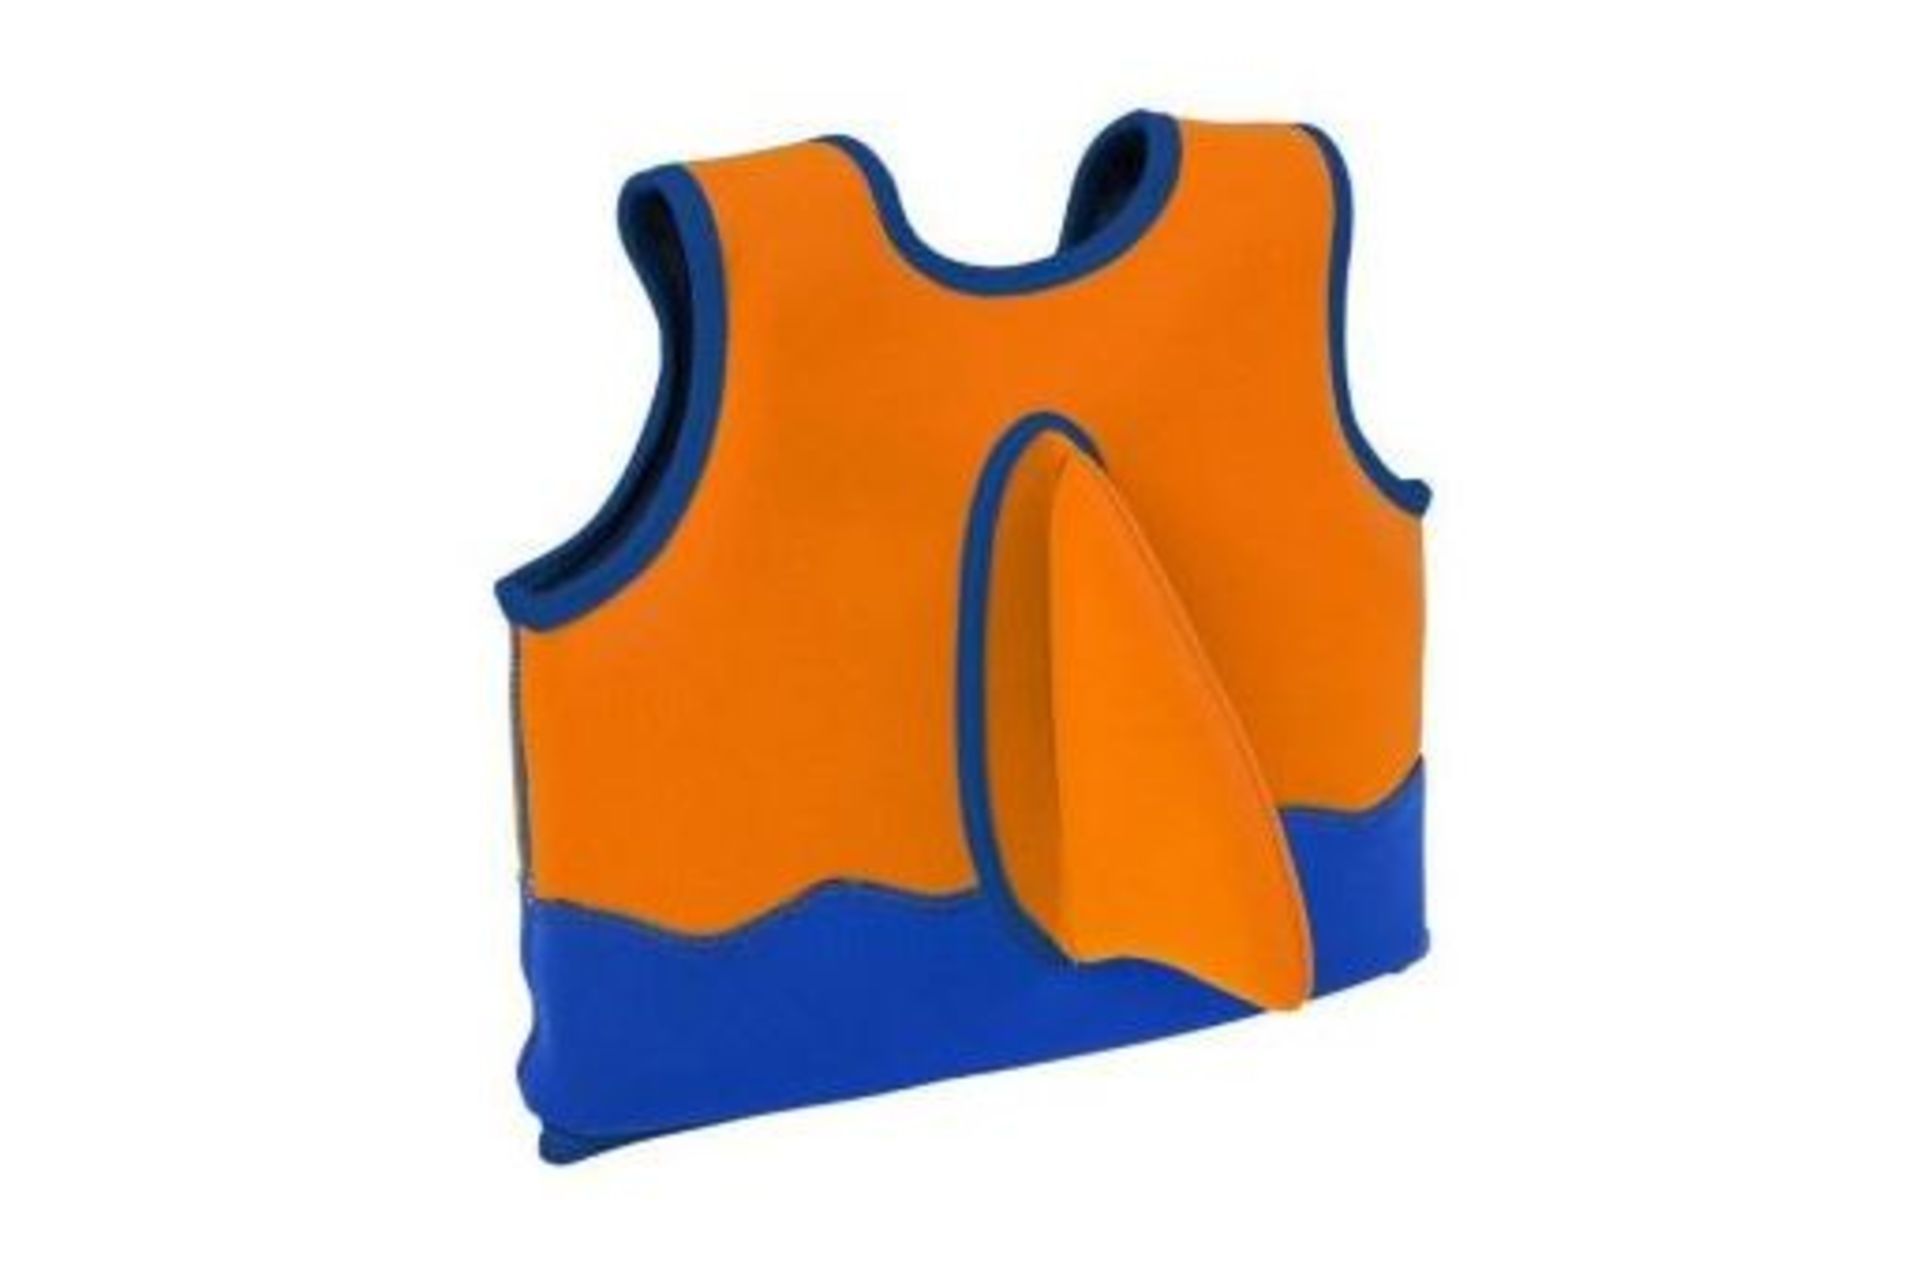 SUNNY LIFE / FLOAT VEST SHARKY / YELLOW & NAVY / 2-3 YEARS / RRP £30.00 AS NEW WITH TAGS IN ORIGINAL - Image 2 of 2